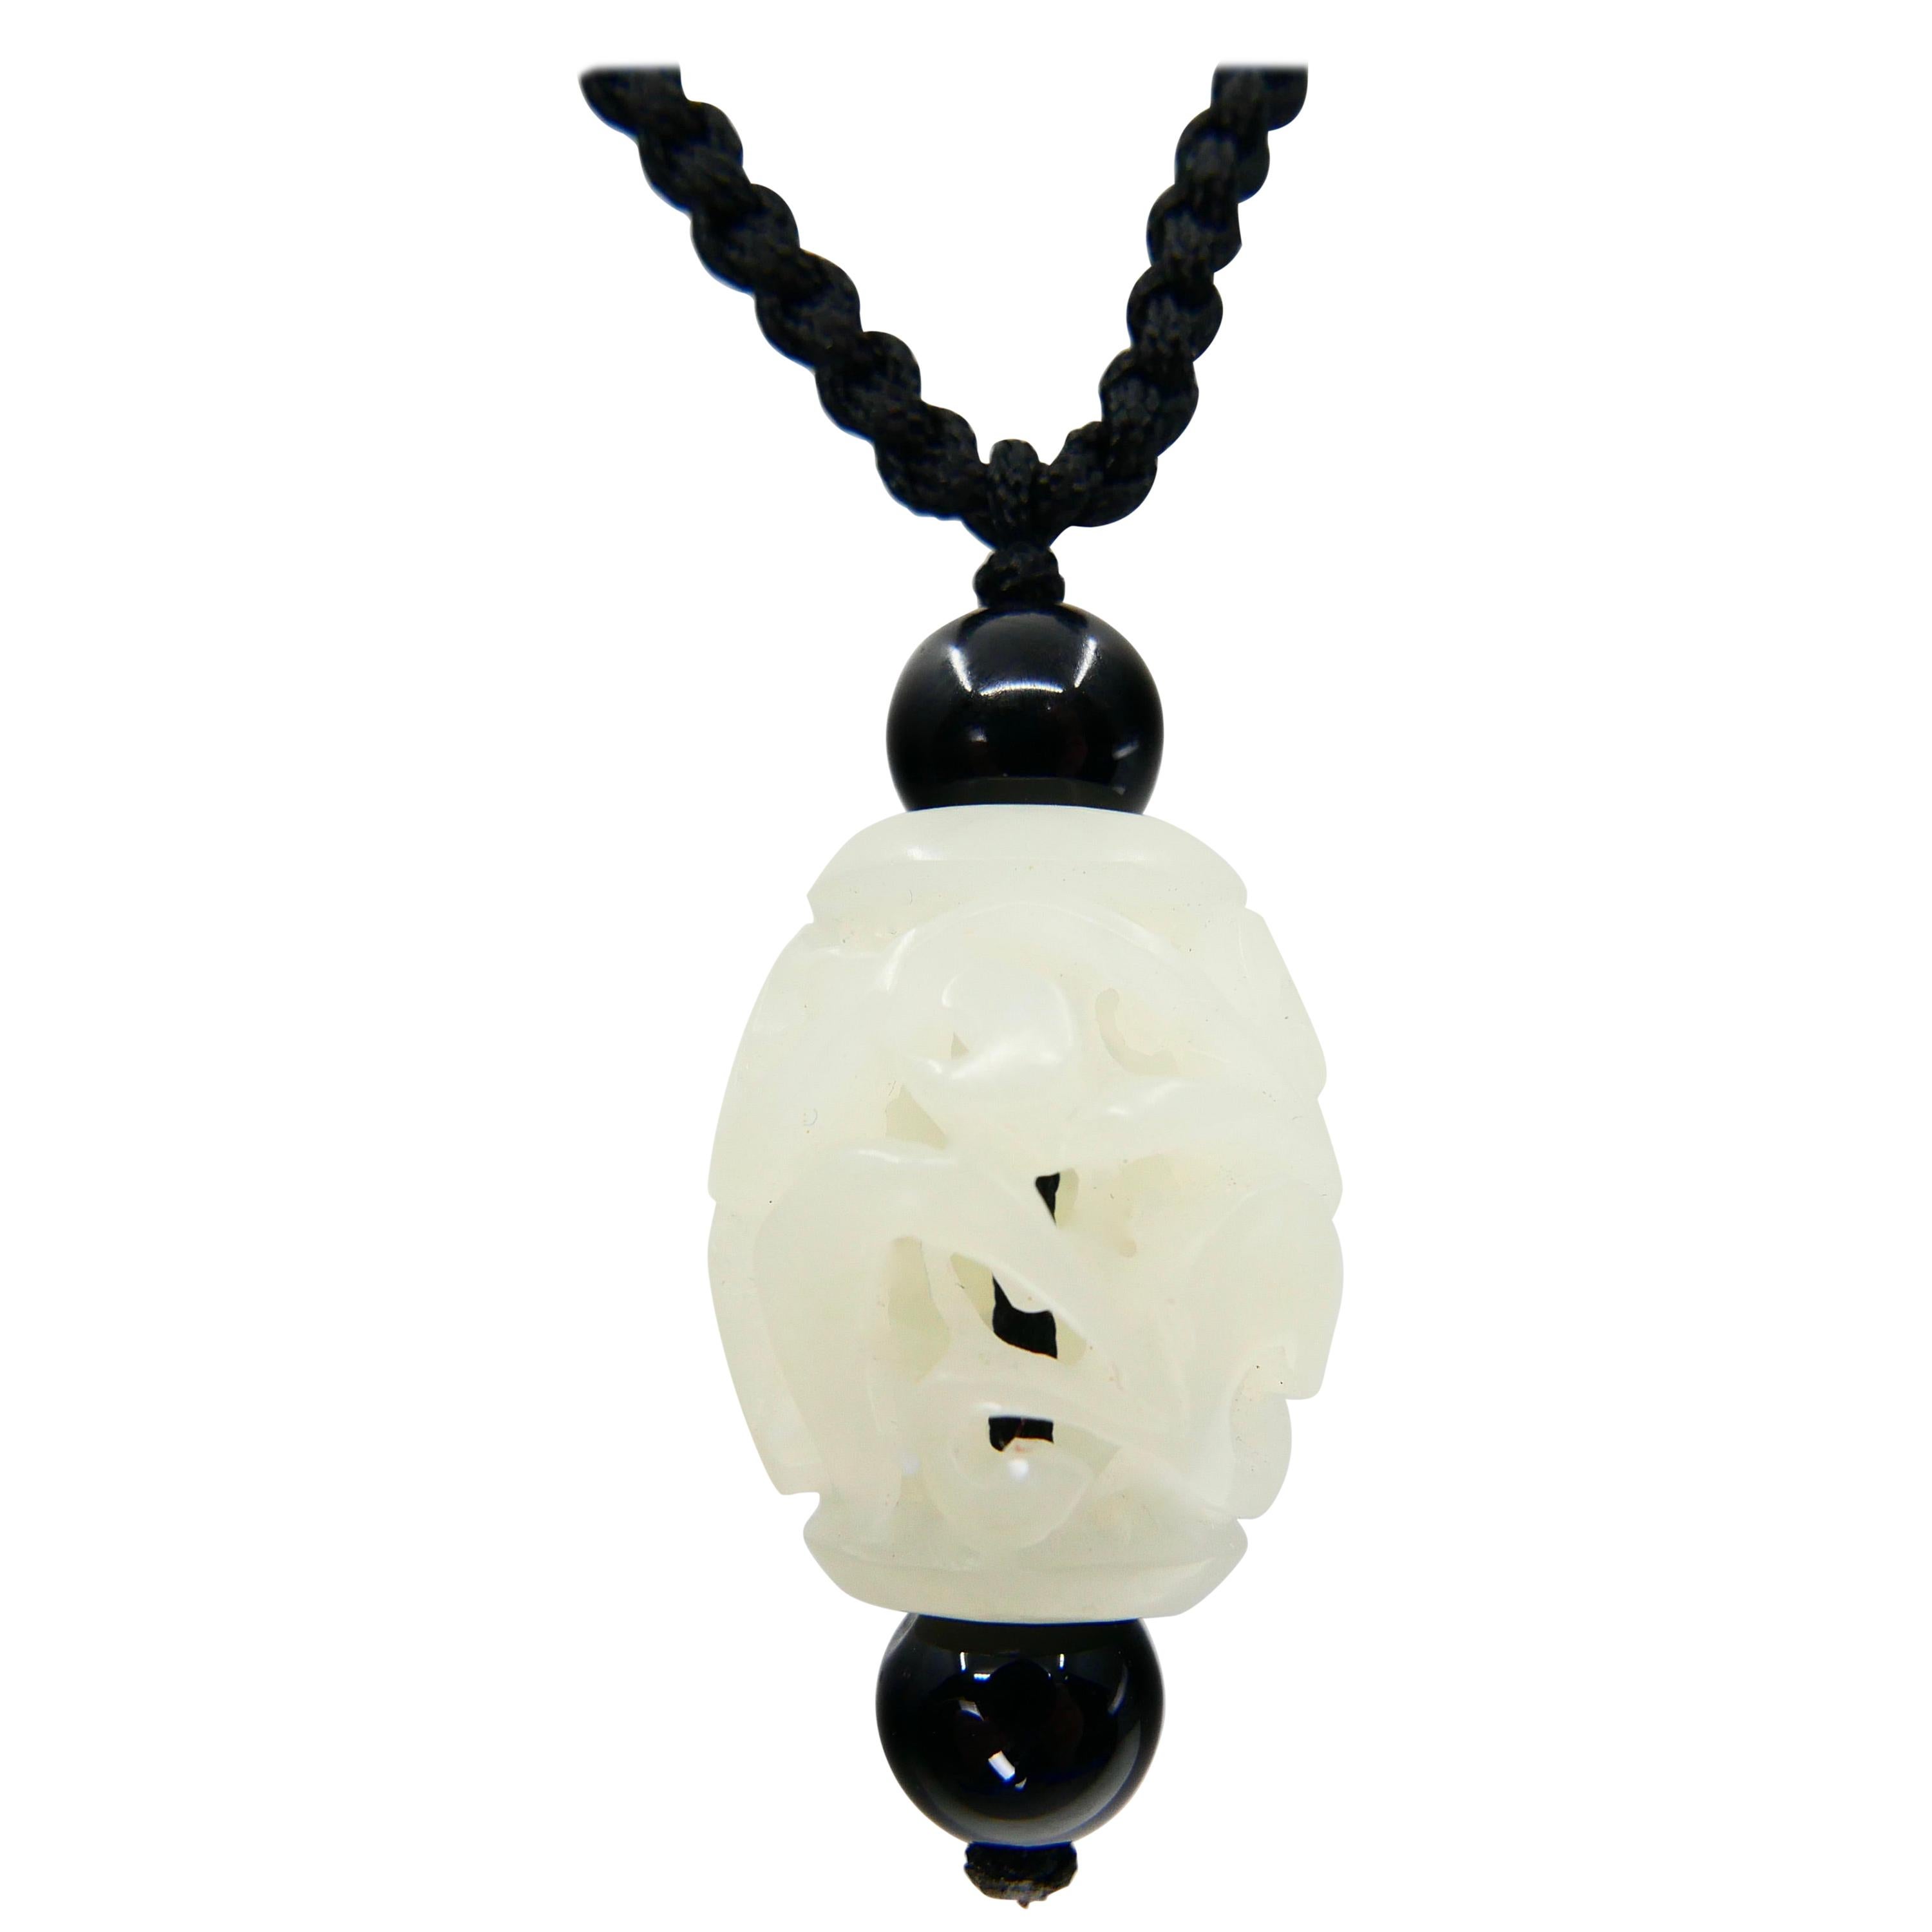 Certified Natural Nephrite White Jade Pendant, Well Hollowed, Detailed Carving